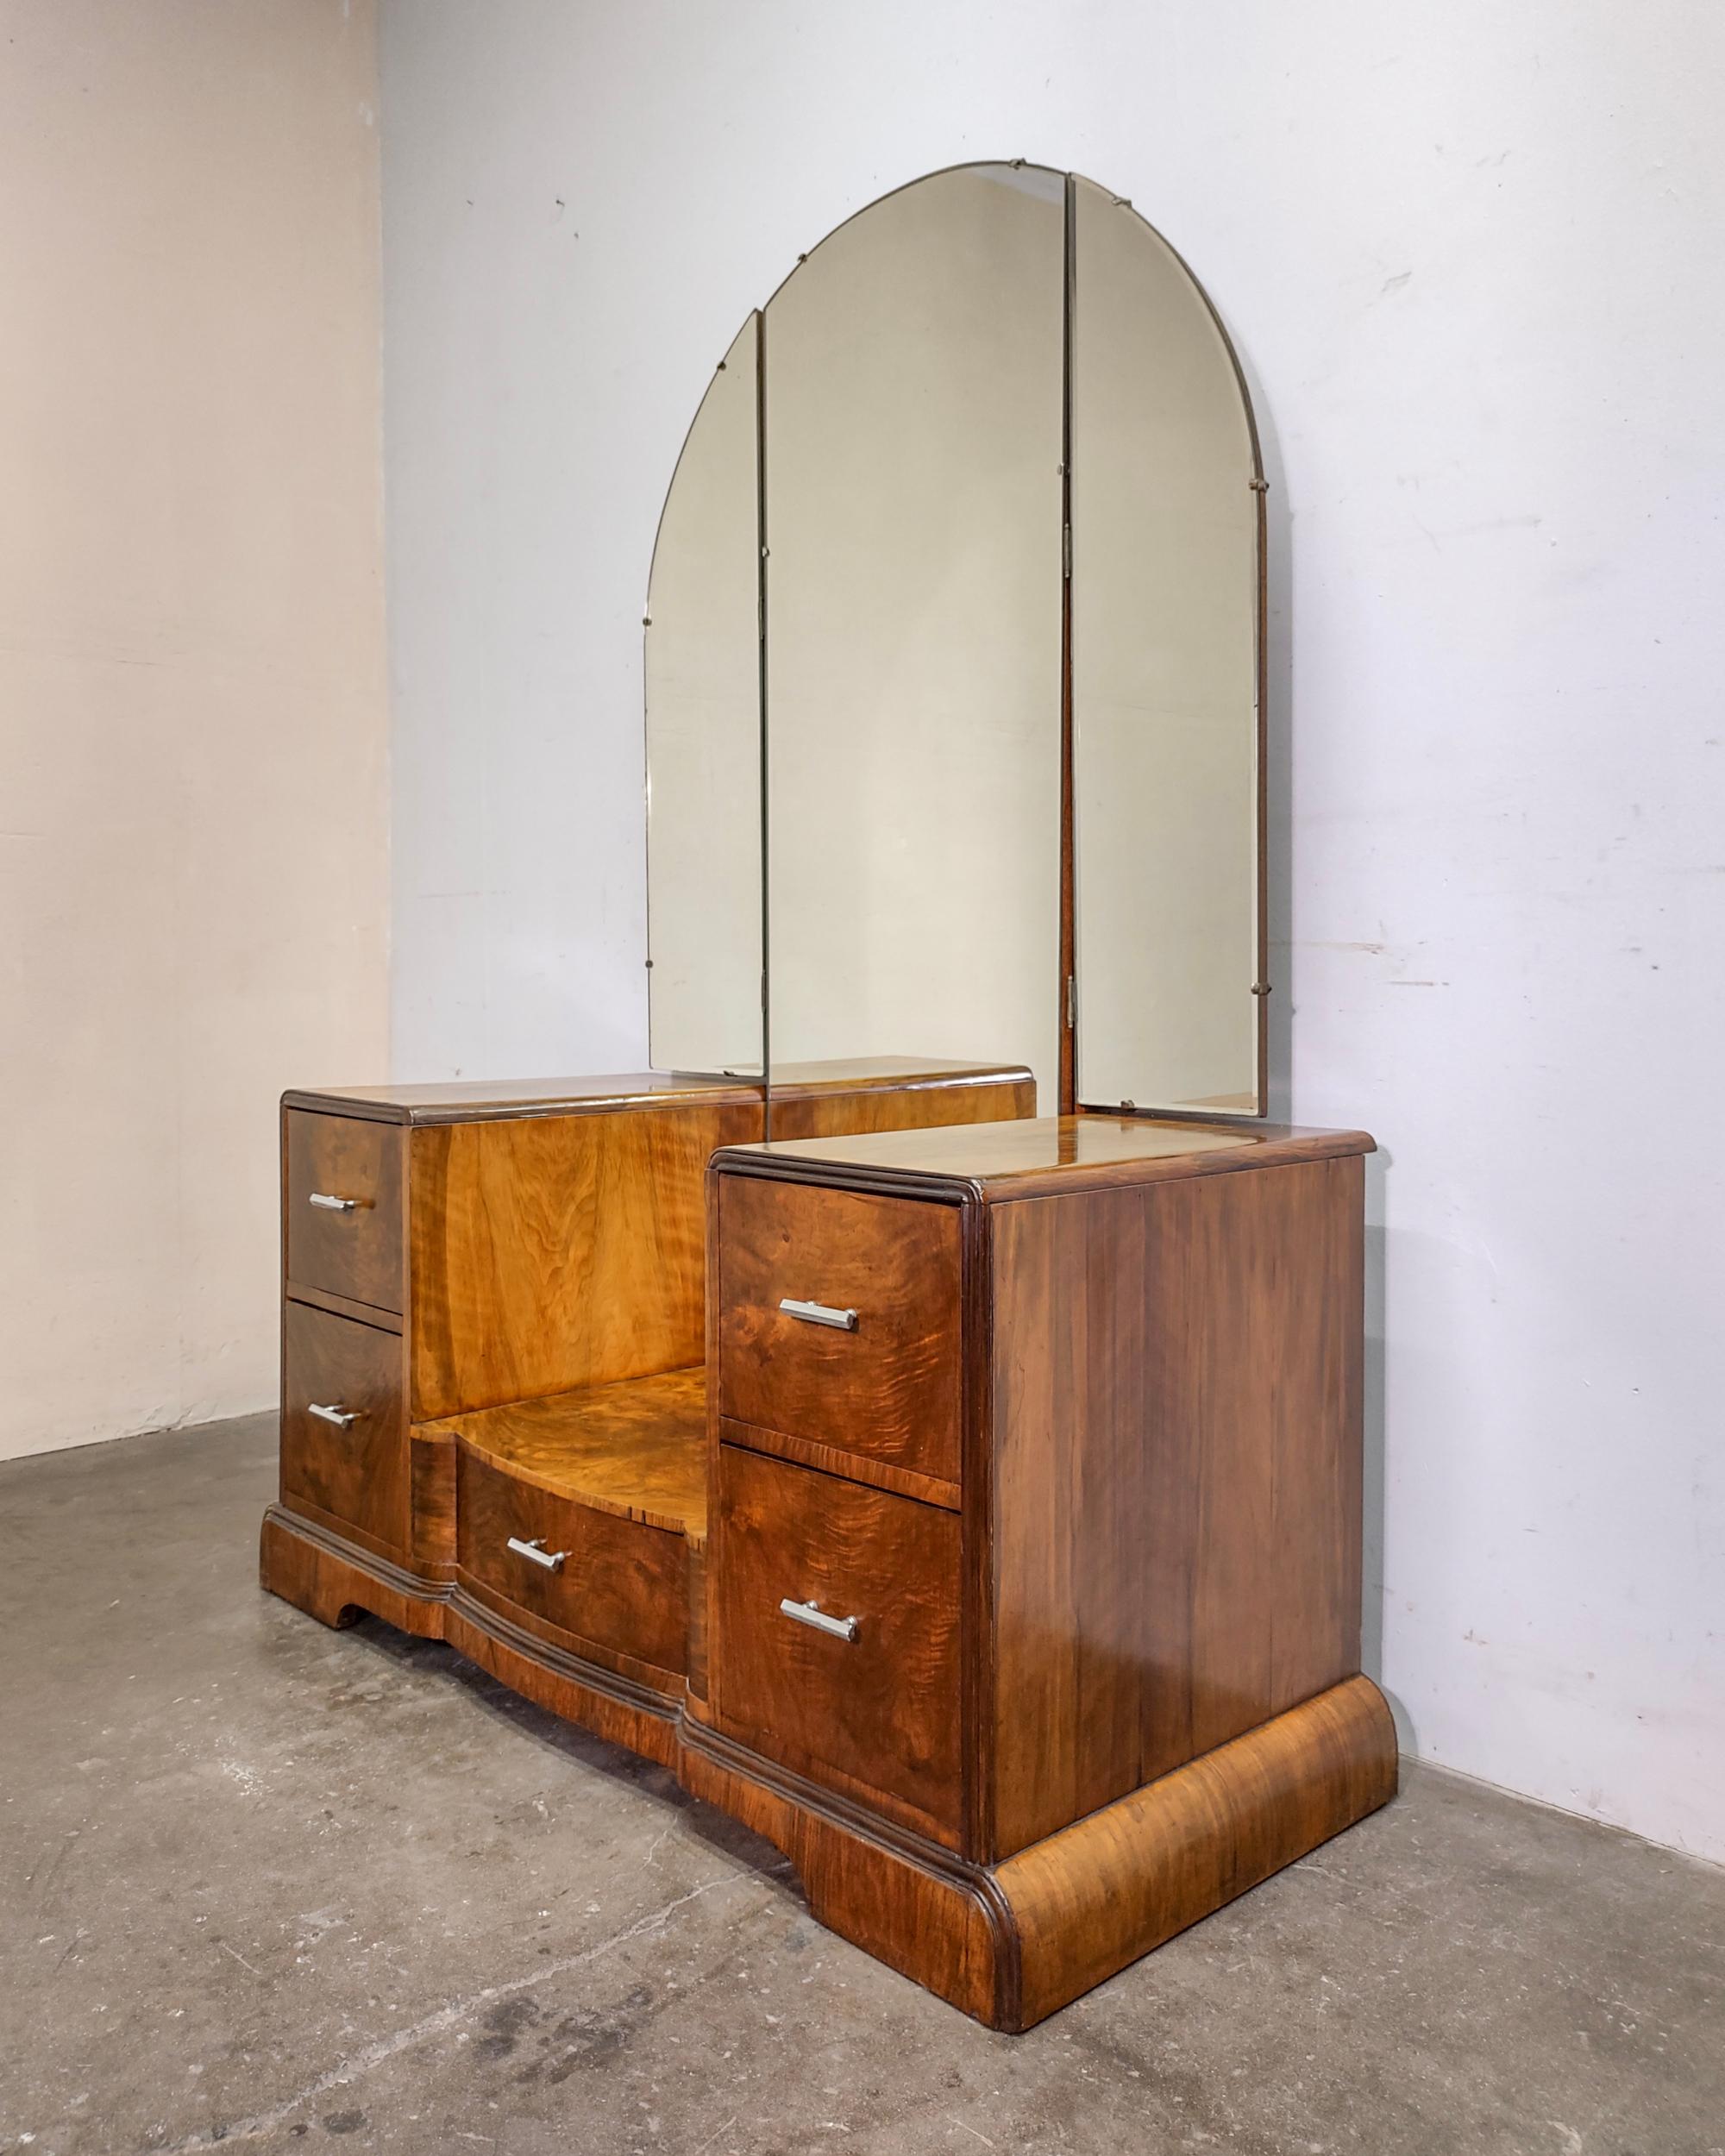 Beautiful art deco vanity with book-matched flame walnut veneer over solid wood. Triptych mirror with arched top, each side pivots outwards. Two deep drawers on either side and one in the center with original chrome hardware. Beautiful curvature on